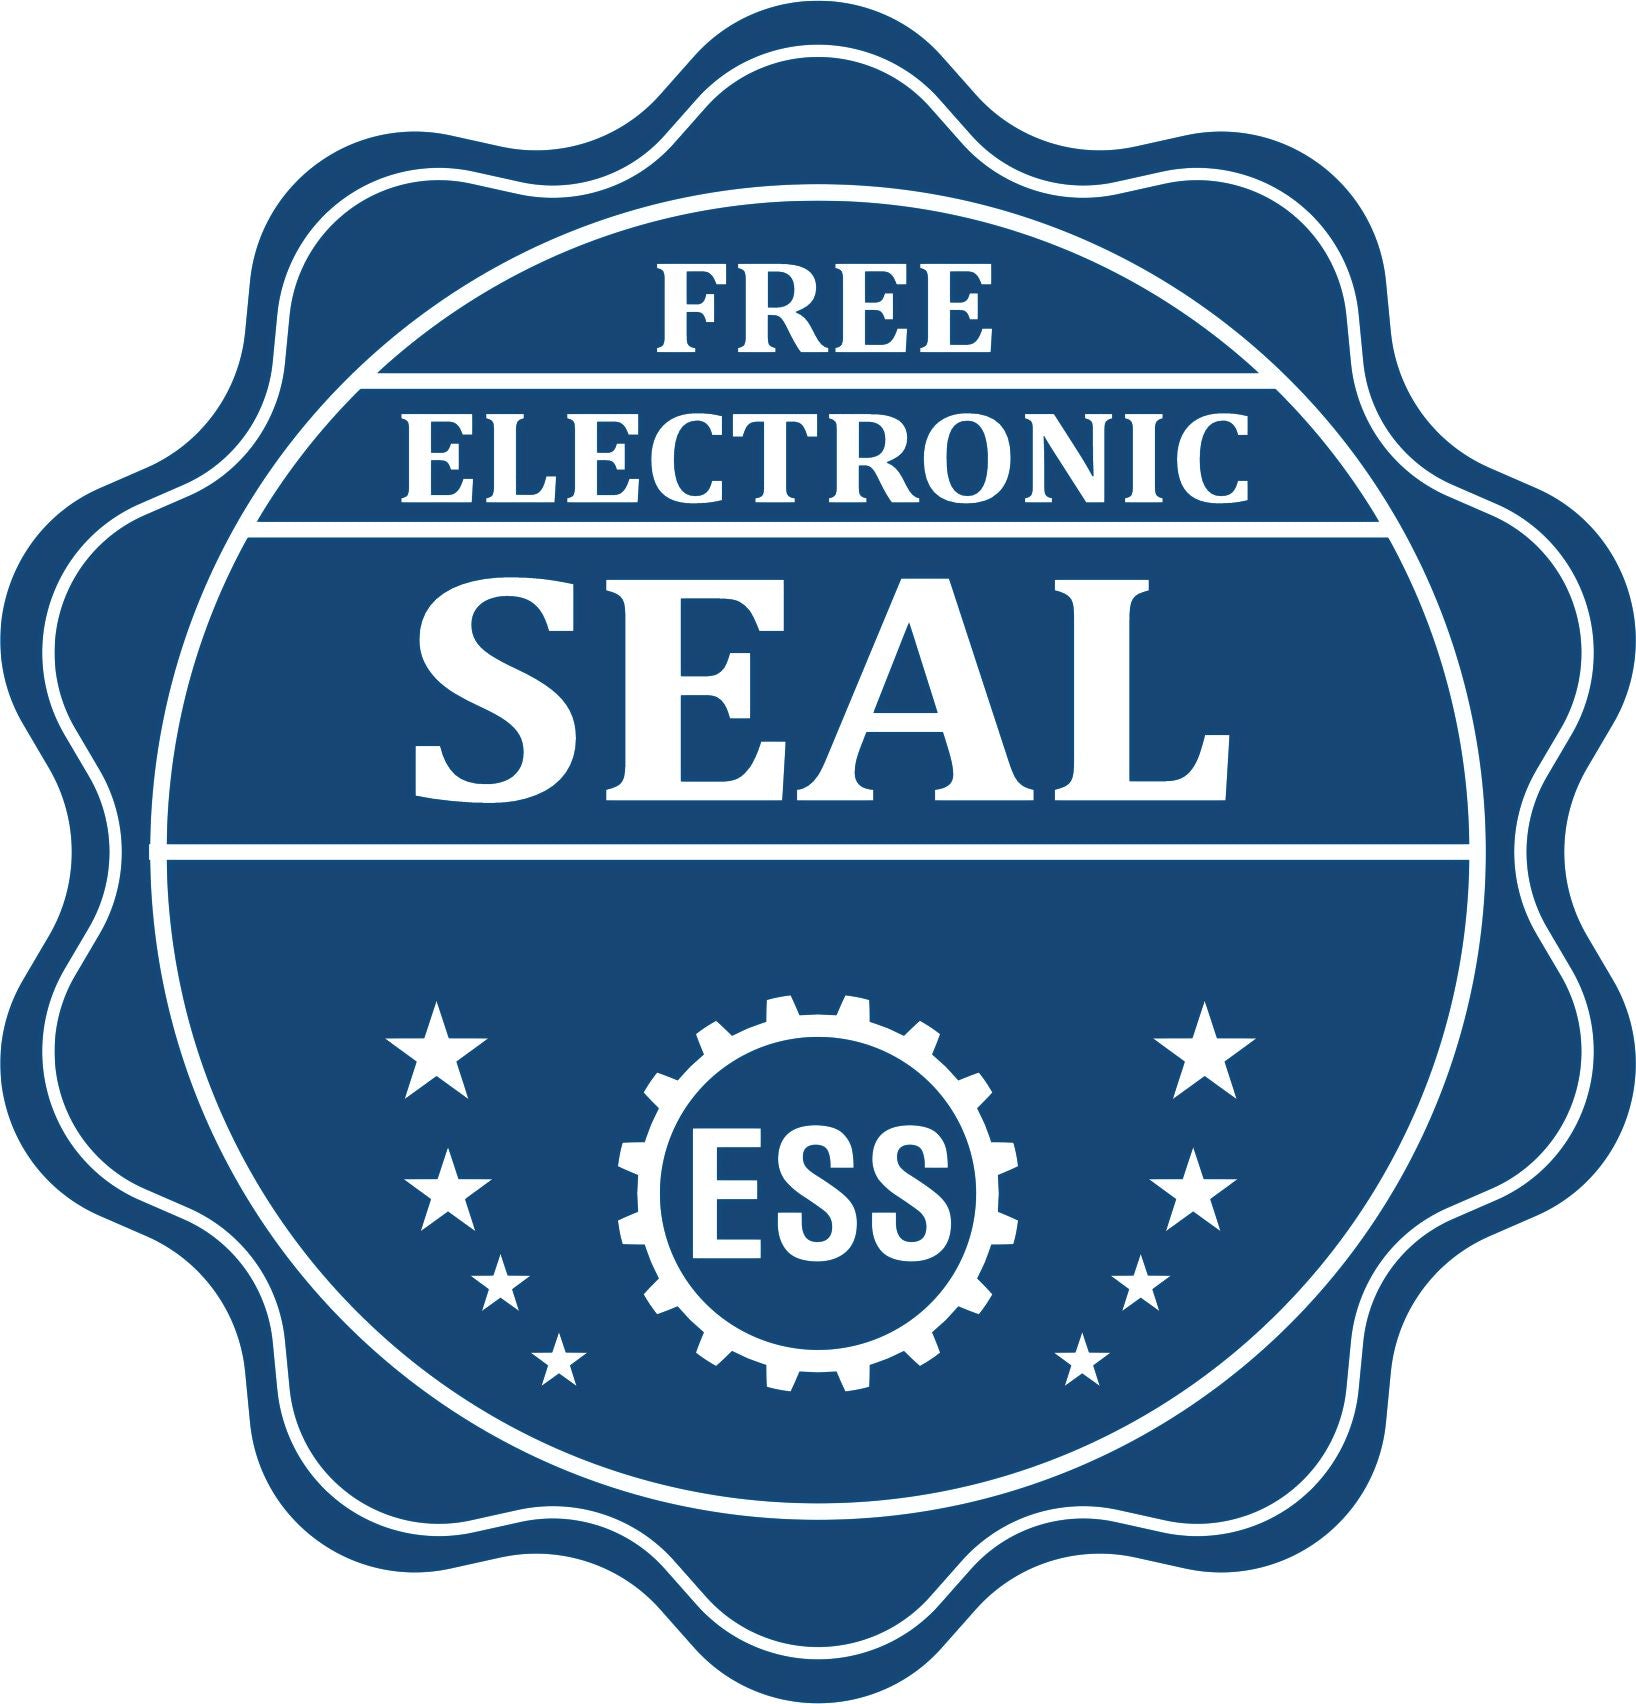 A badge showing a free electronic seal for the Colorado Engineer Desk Seal with stars and the ESS gear on the emblem.